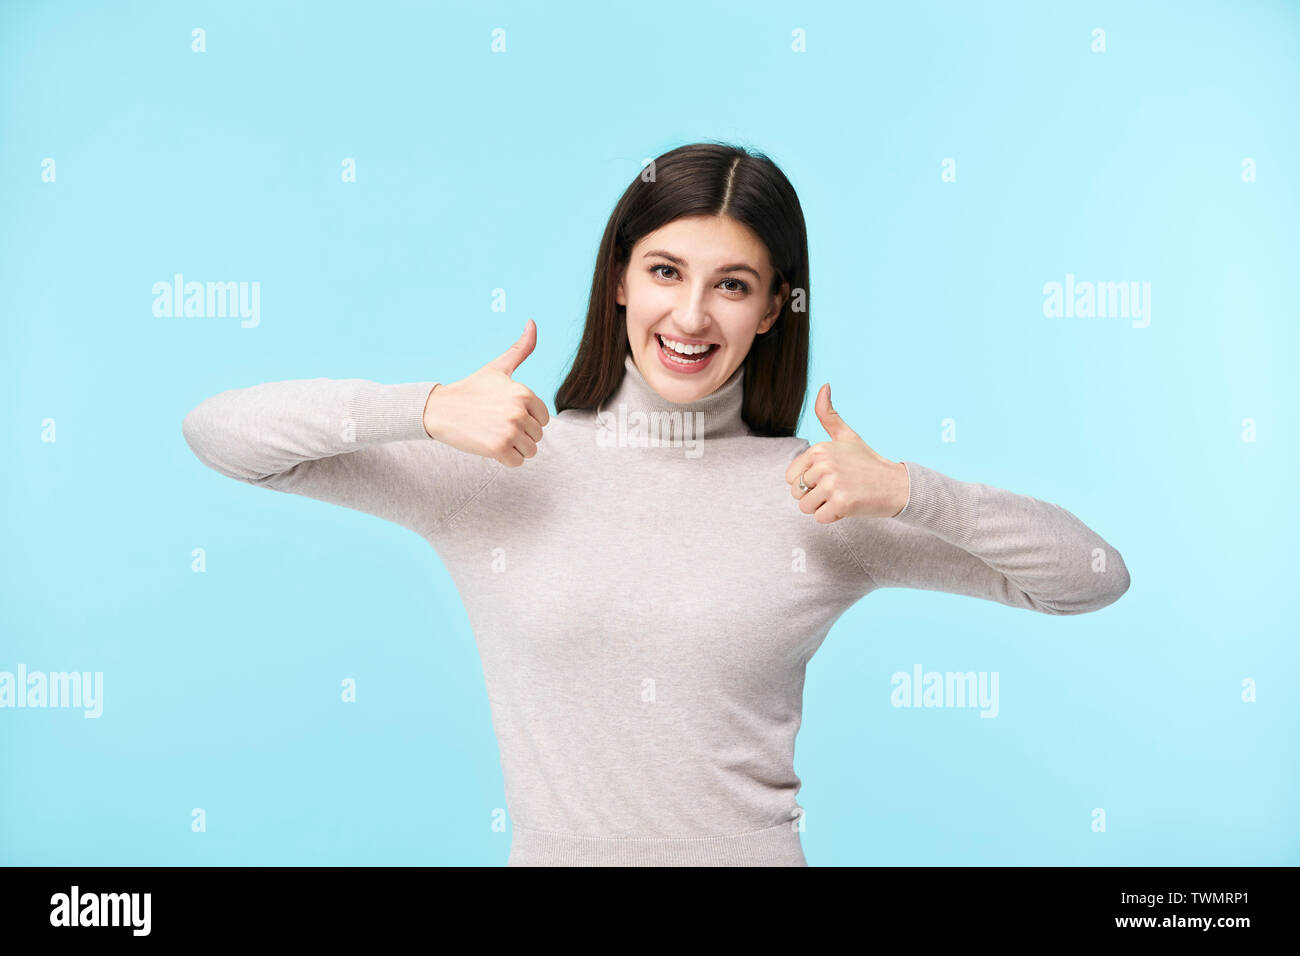 portrait of a beautiful young caucasian woman with two thumbs up, looking at camera smiling, isolated on blue background Stock Photo